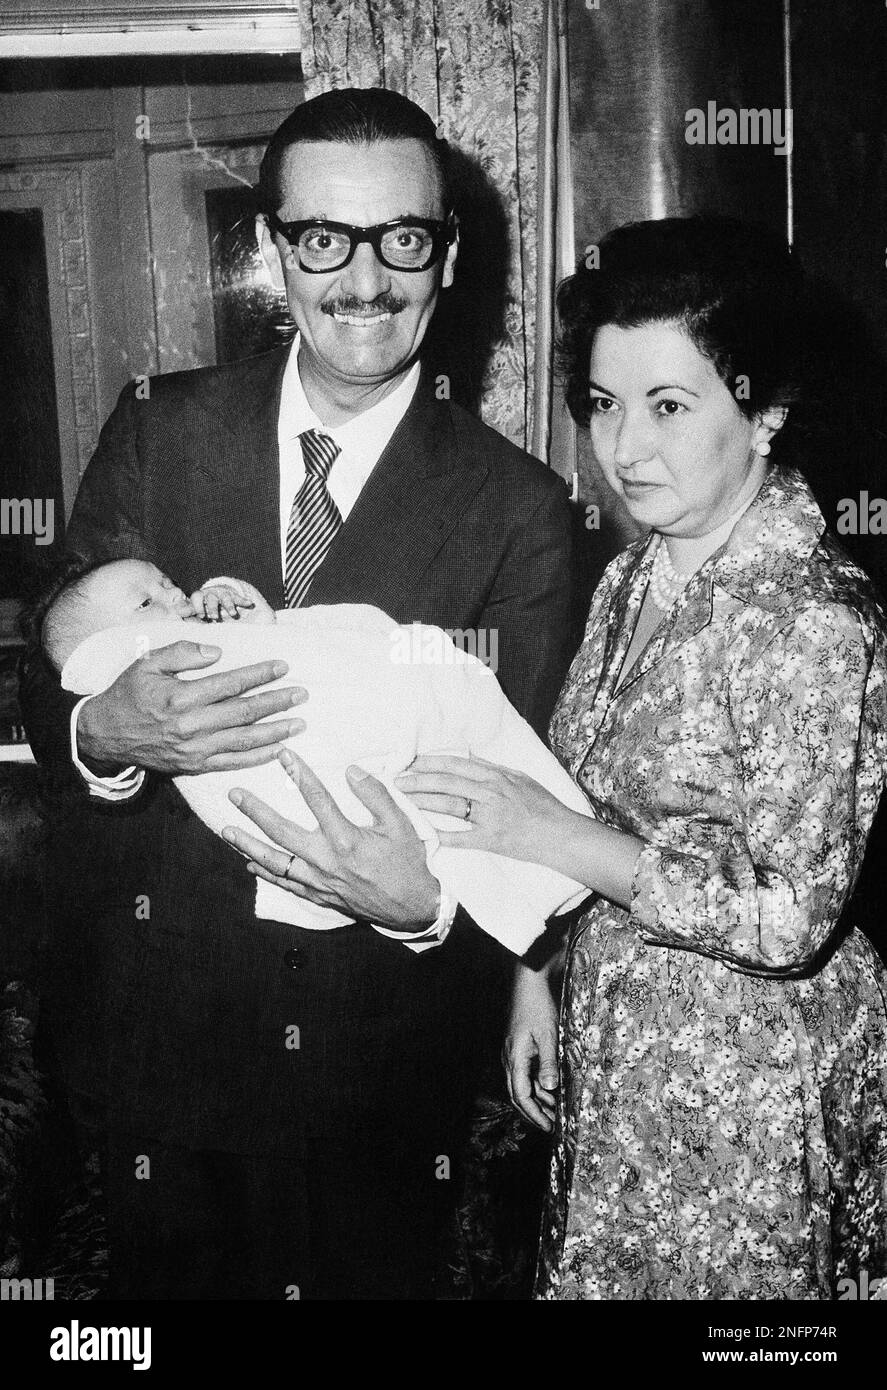 Joao Goulart who resigned the presidency of Brazil, and his wife pose with their grandchild on Sept. 9, 1961in England aboard the ship Uruguay Star before sailing from Lisbon. Members of his immediate family are accompanying him. (AP Photo) Stockfoto